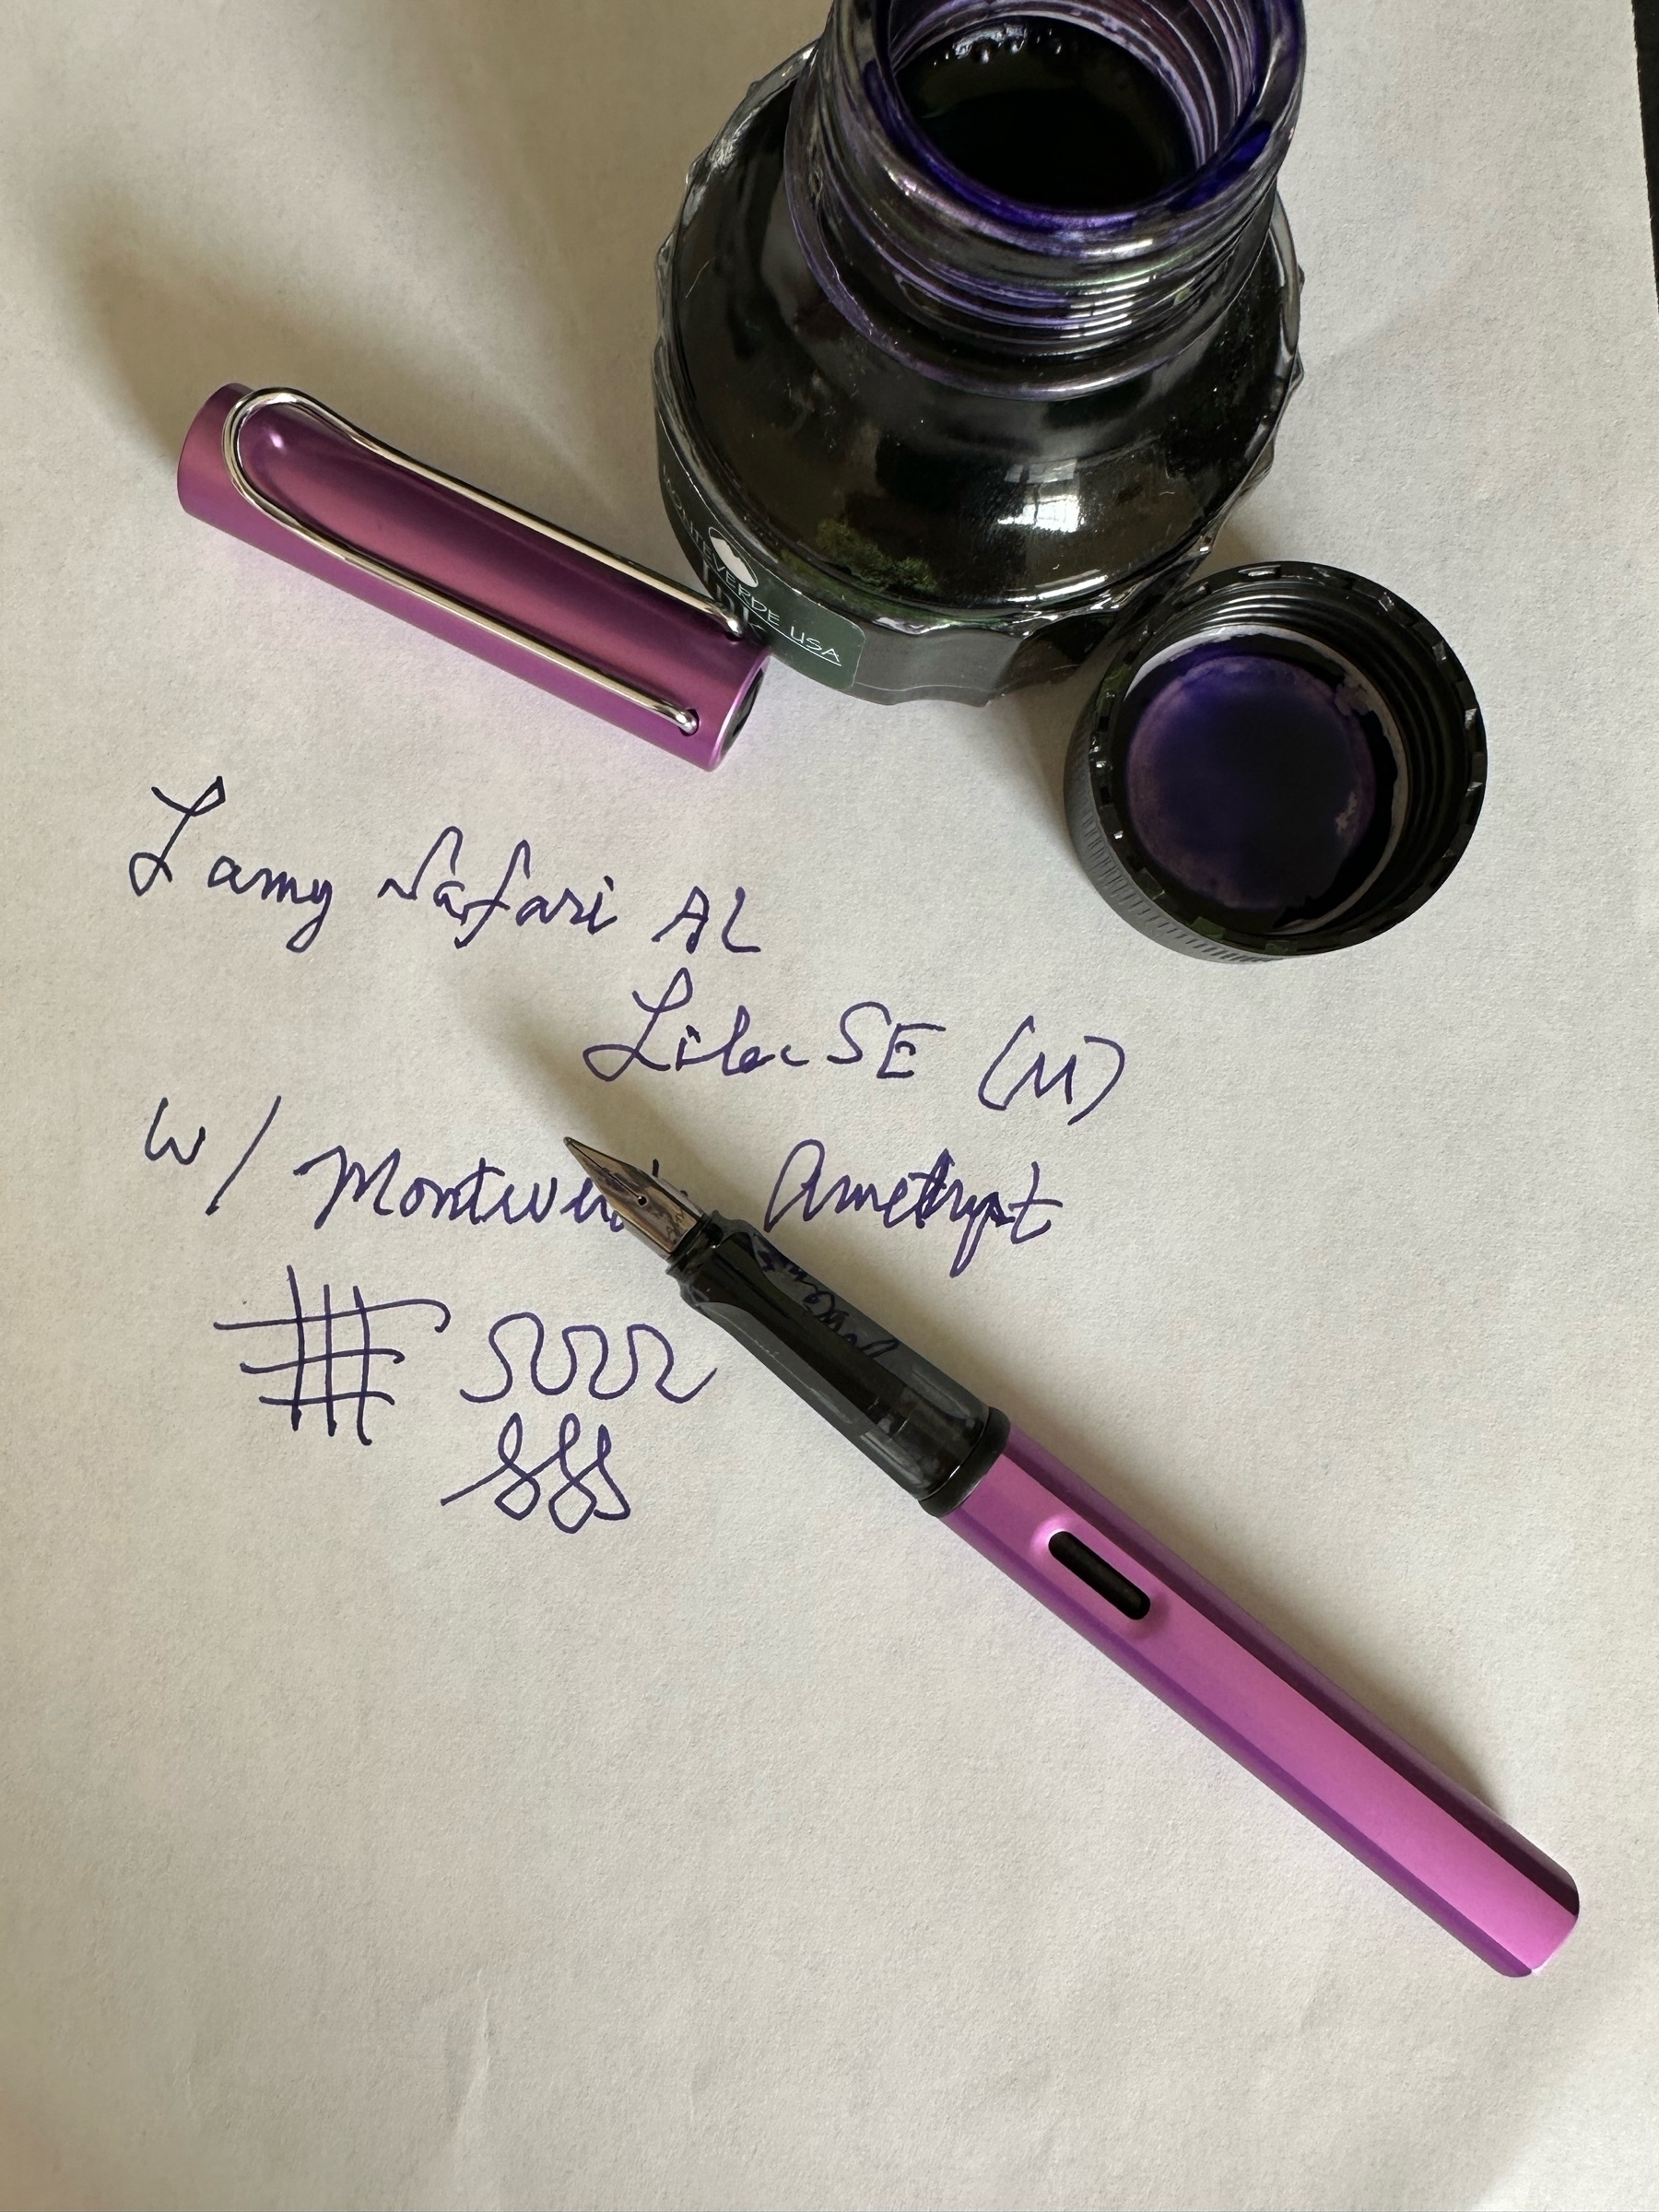 Fountain pen and sample.